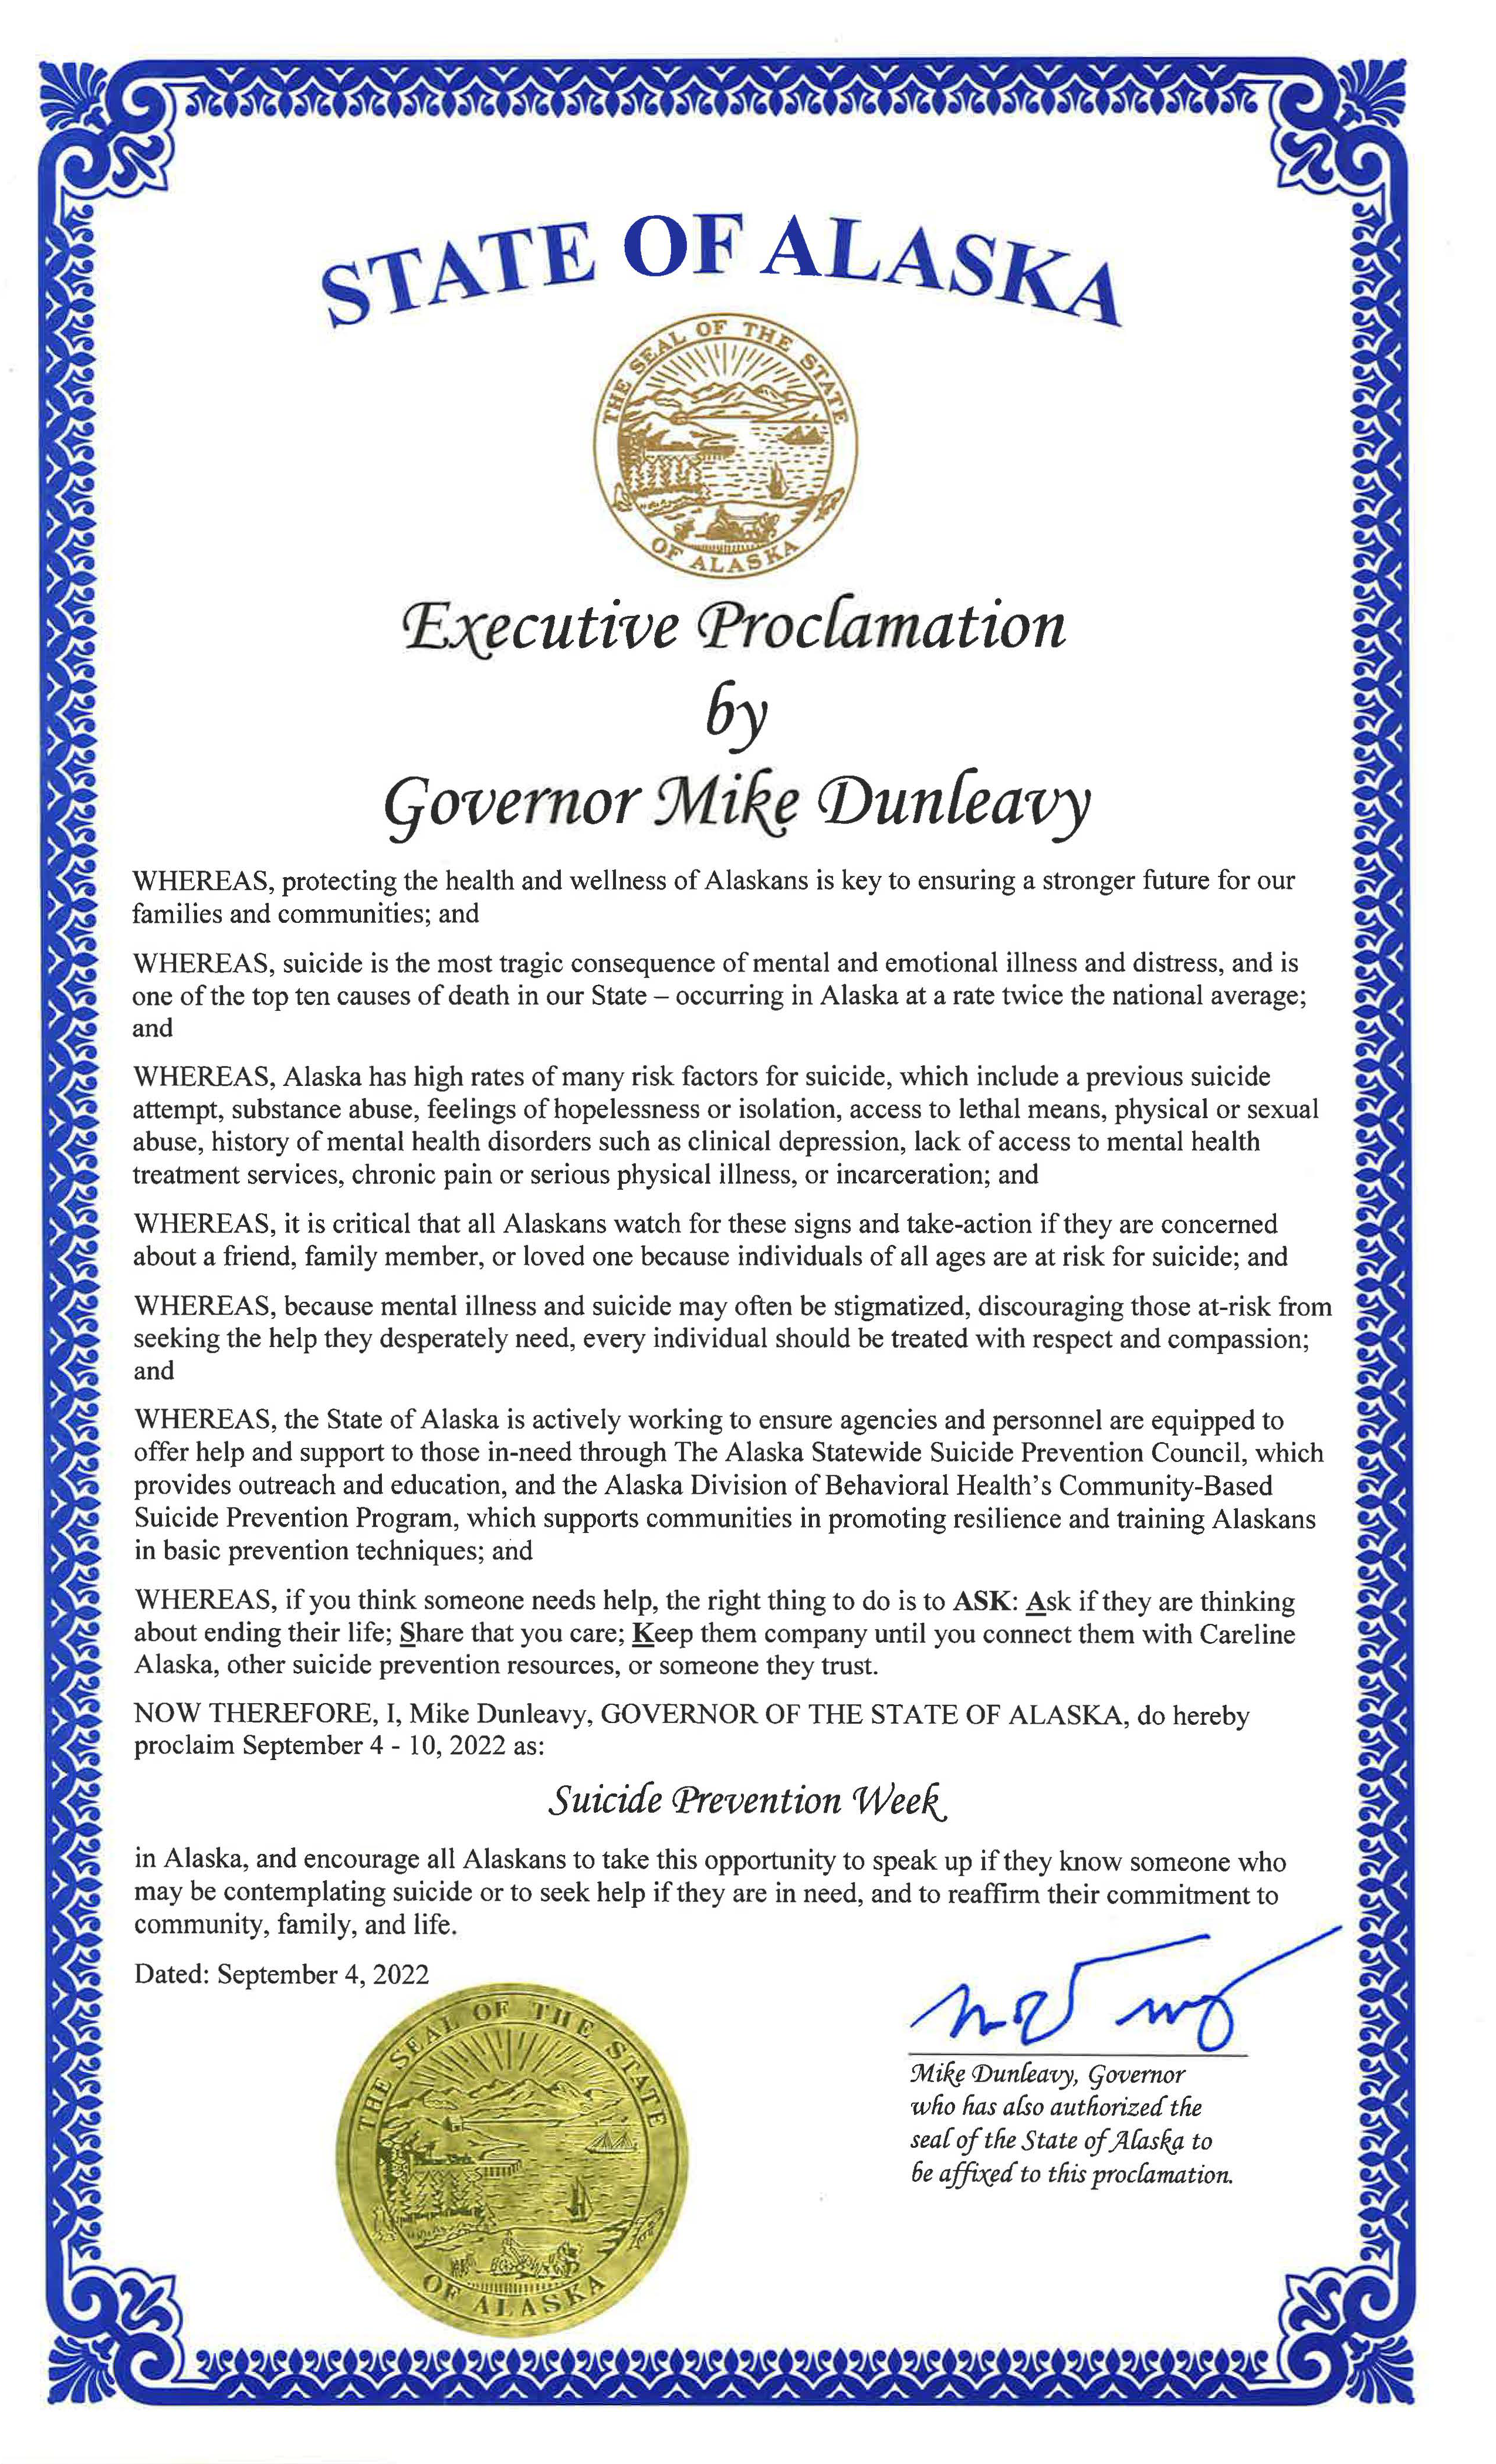 2022 Suicide Prevention Week Proclamation by Governor Mike Dunleavy